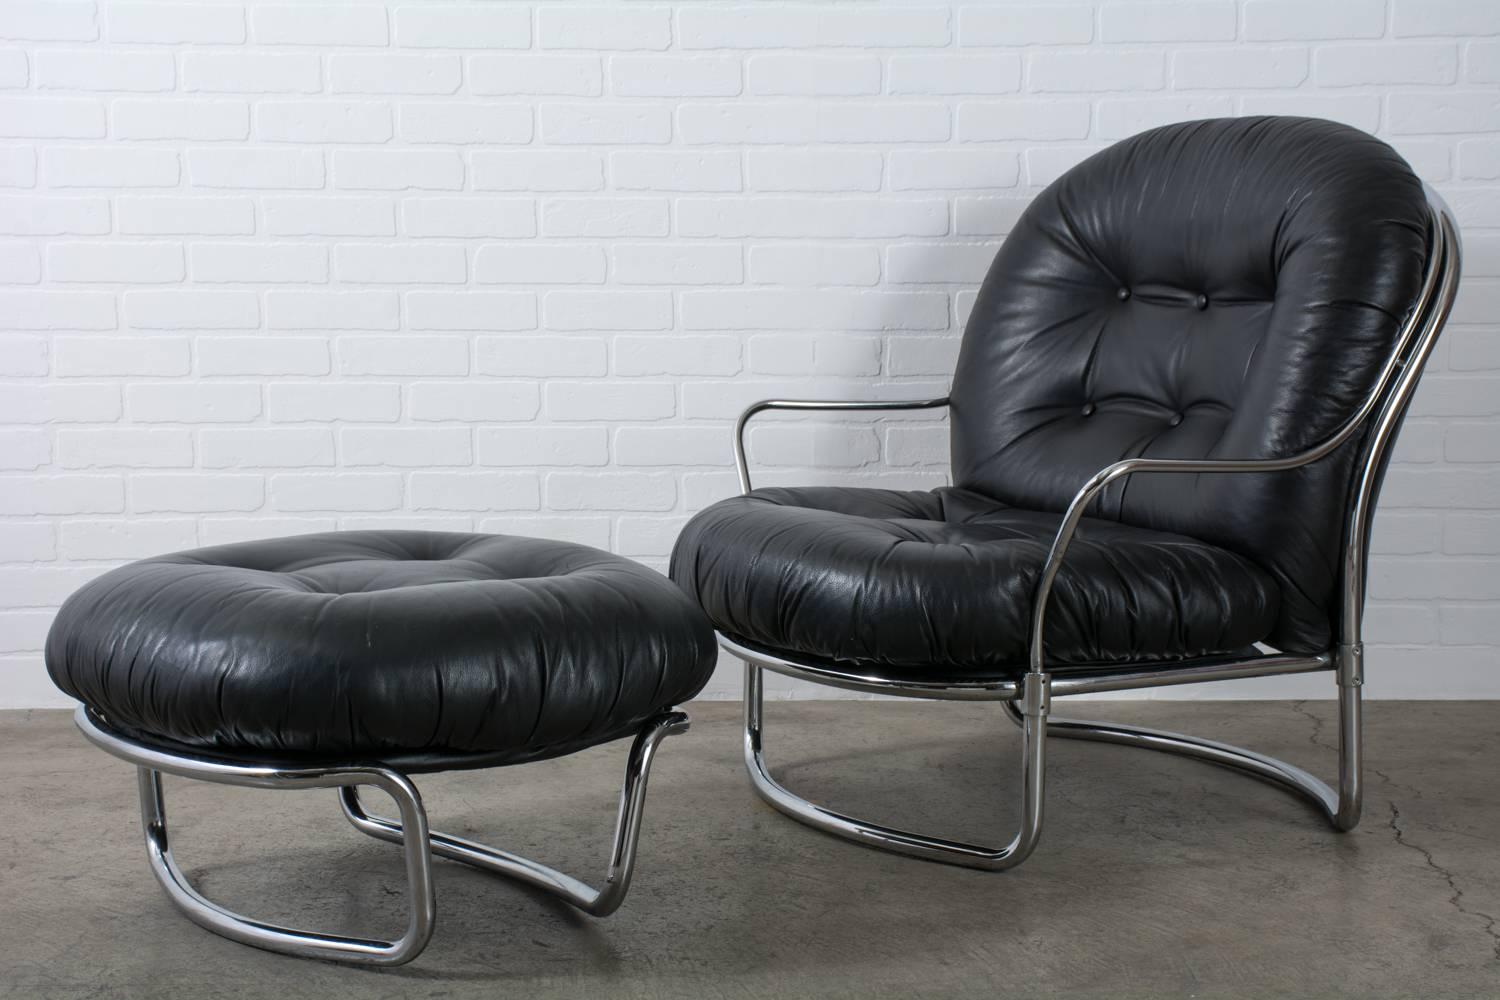 Carlo di Carli Black Leather Lounge Chair and Ottoman, Italy, 1960s For Sale 1